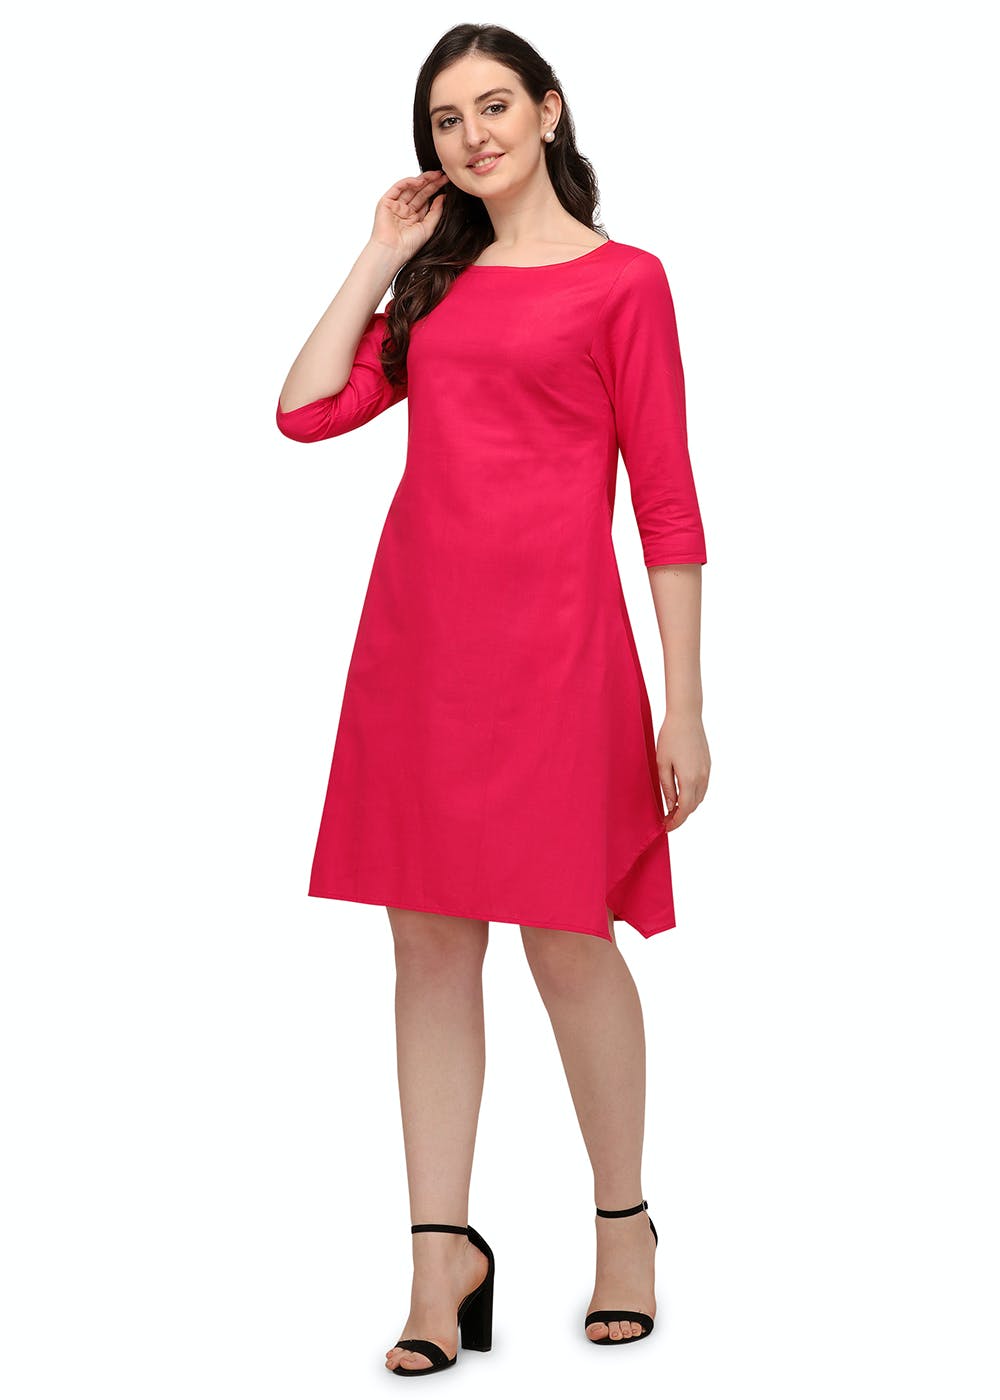 Party Wear Plain Ladies Velvet One Piece Dress at Rs 425/piece in Gurgaon |  ID: 23465956797